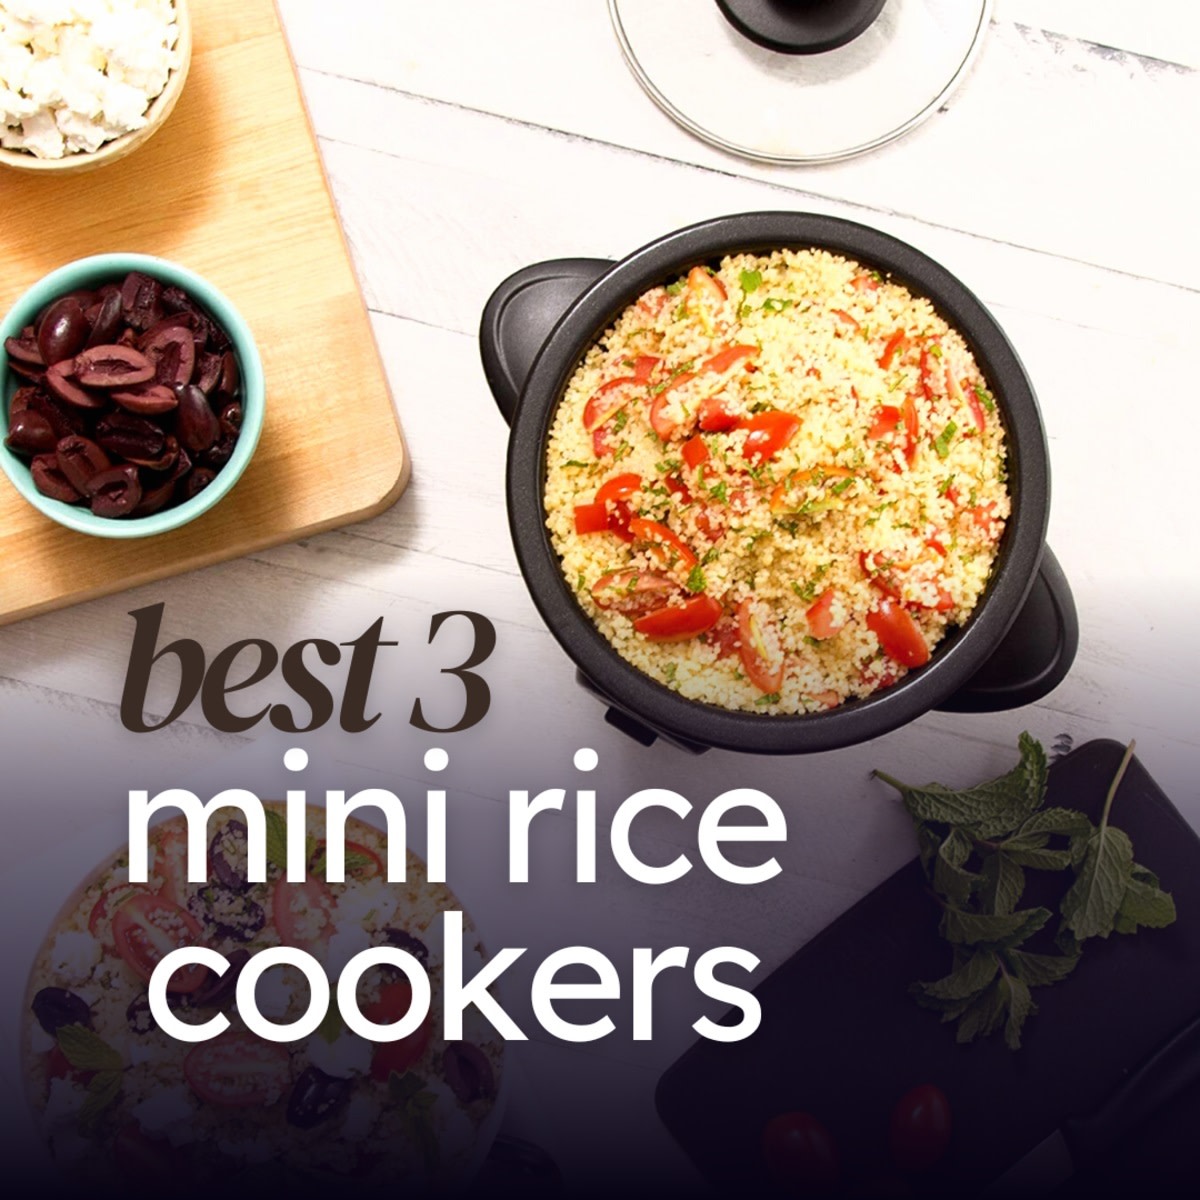 https://images.saymedia-content.com/.image/t_share/MjAxNDY1ODQwNzQ1MzI2MTMz/3-best-electric-rice-cookers.jpg